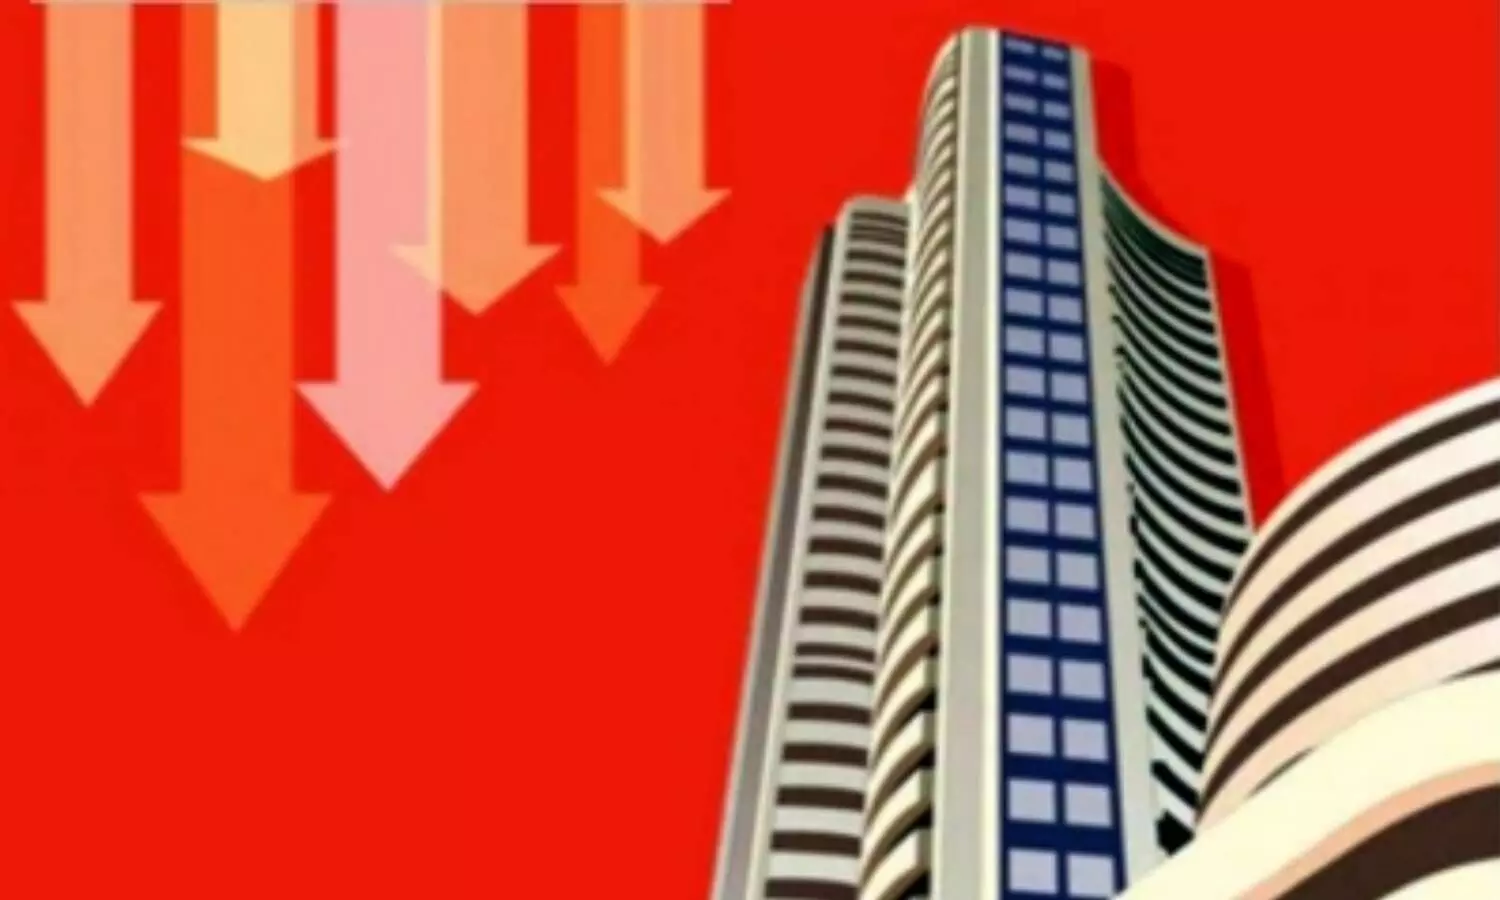 M-cap worst hit down by Rs 1.47 lakh cr